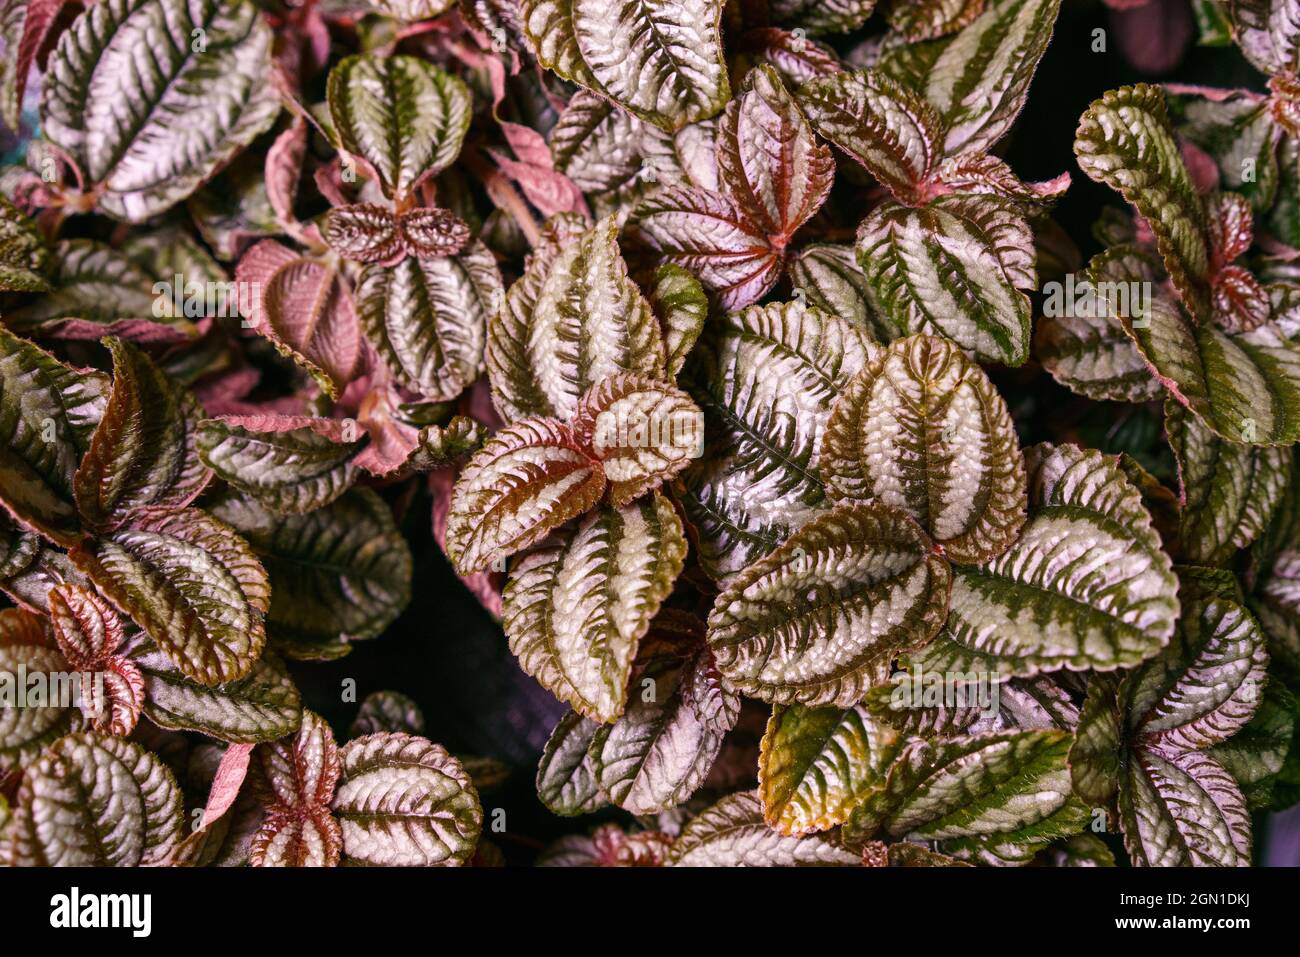 Green and pink leaves of pilea involucrata plant is plant that is sometimes cultivated, especially where there can be high humidity, such as in terrarium. Houseplant as a natural textured background Stock Photo